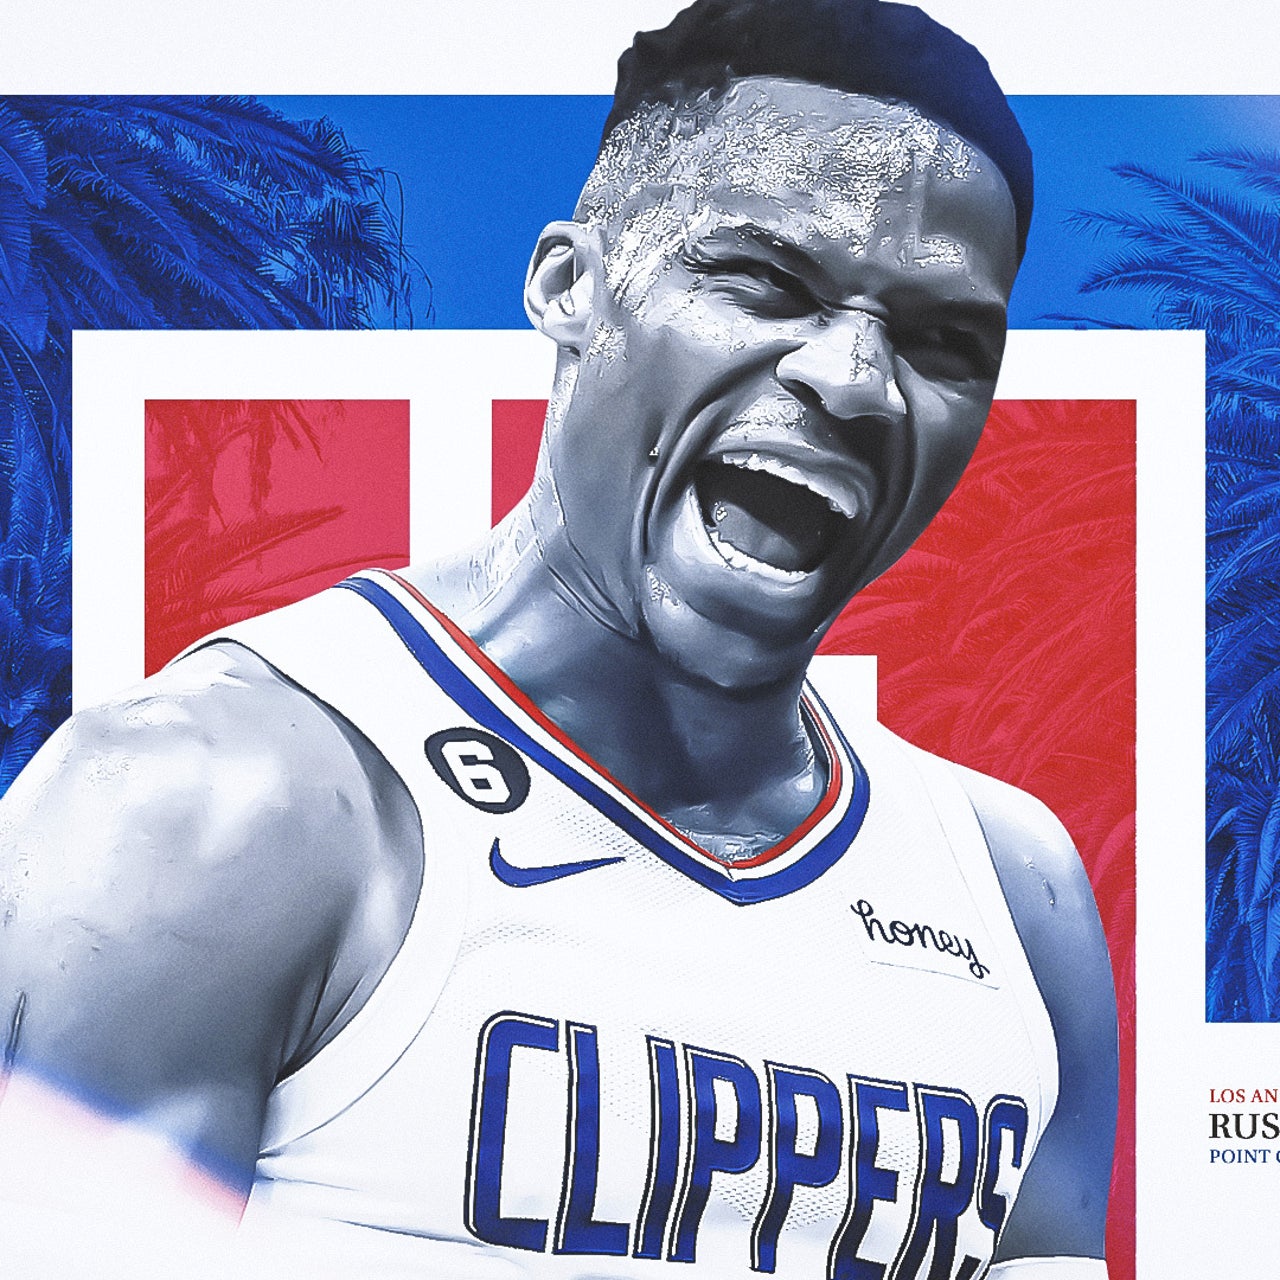 2021-22 Los Angeles Lakers Player Review: Russell Westbrook